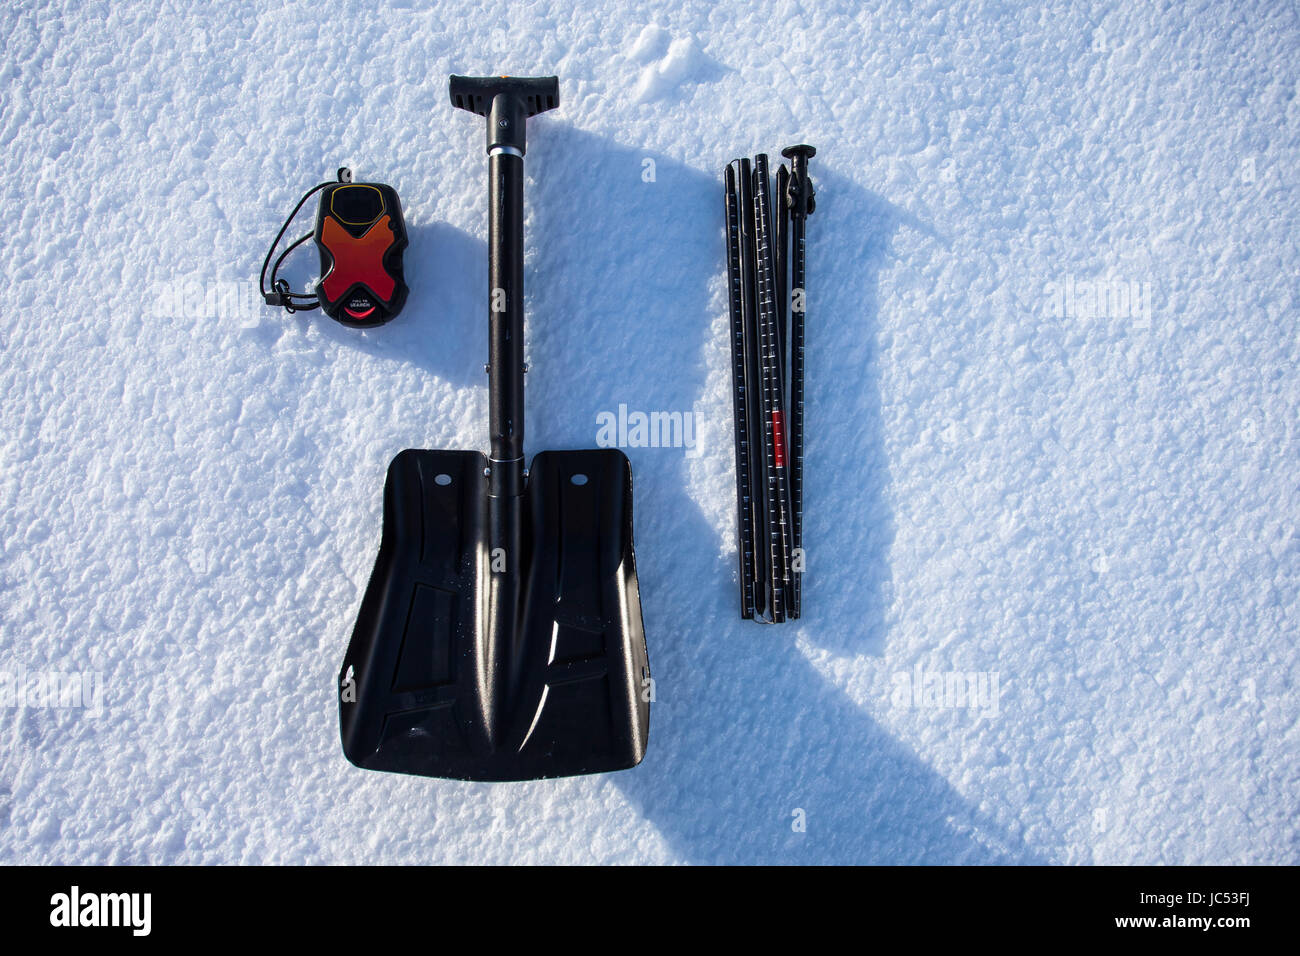 A beacon, shovel and probe, the essentials to a backcountry enthusiasts kit are displayed on the snow. Stock Photo